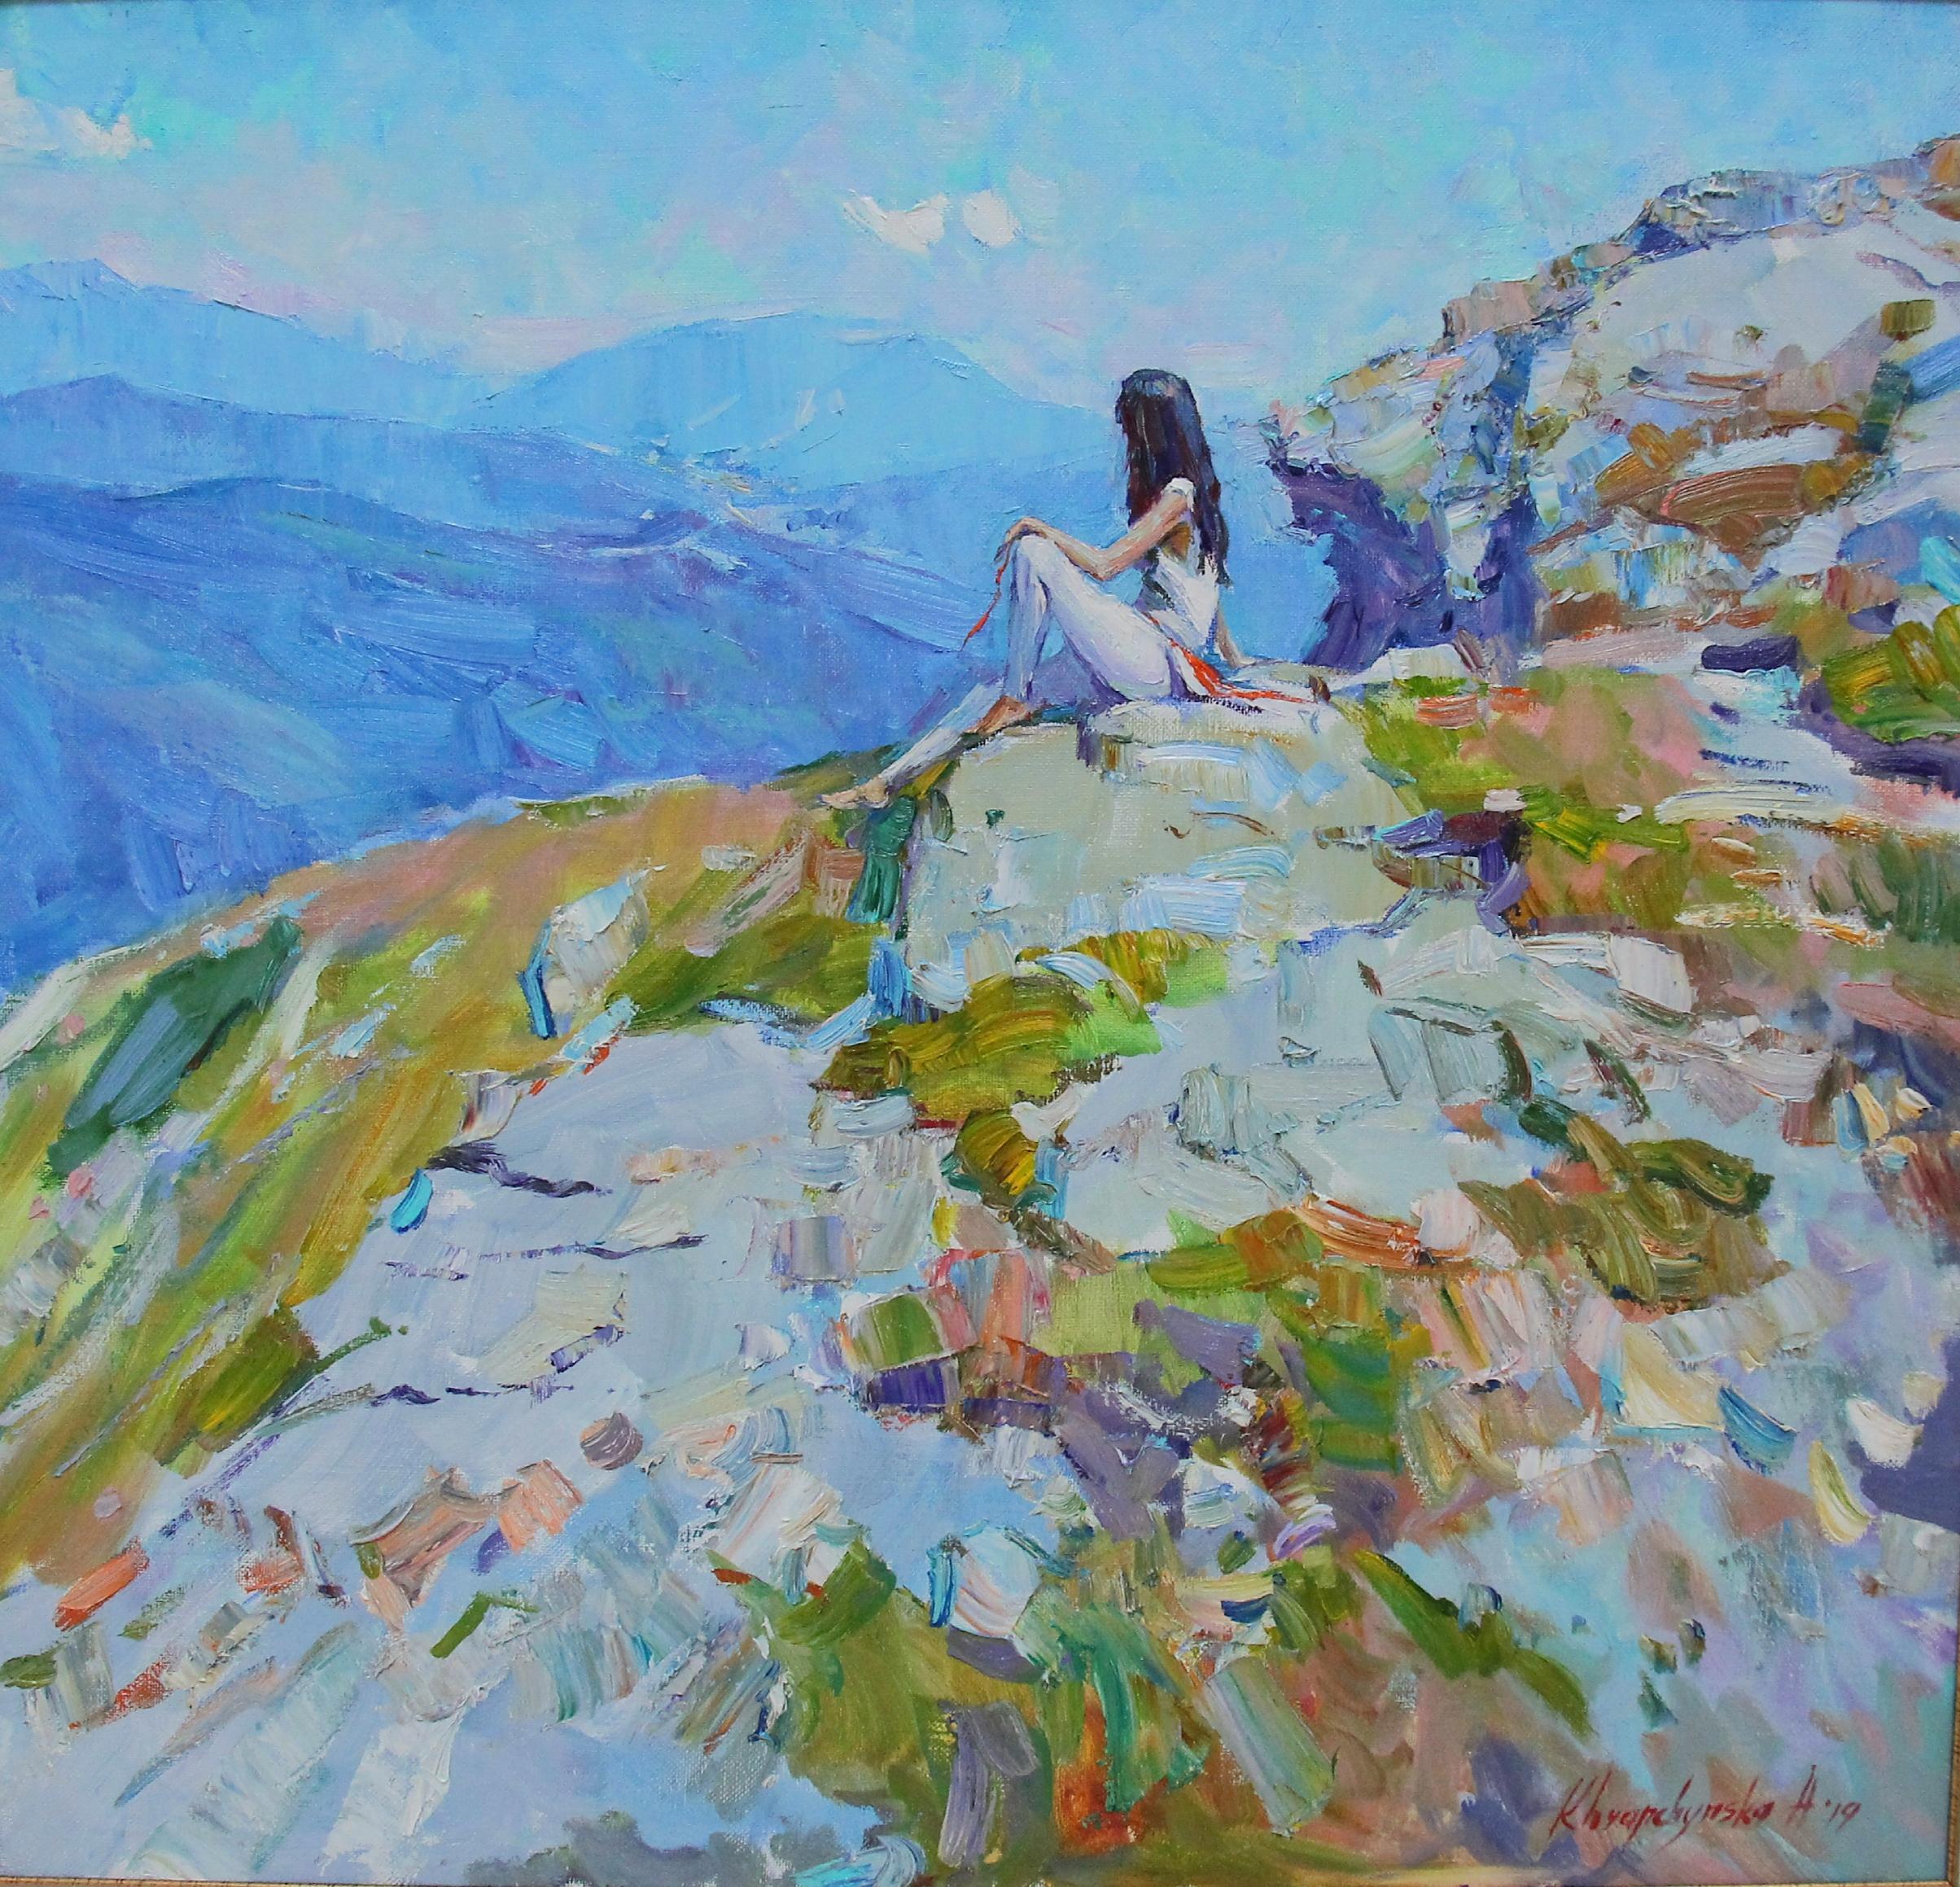 Alina Khrapchynska Figurative Painting - Edelweiss - Landscape Oil Painting Colors Blue Green White Grey Ivory